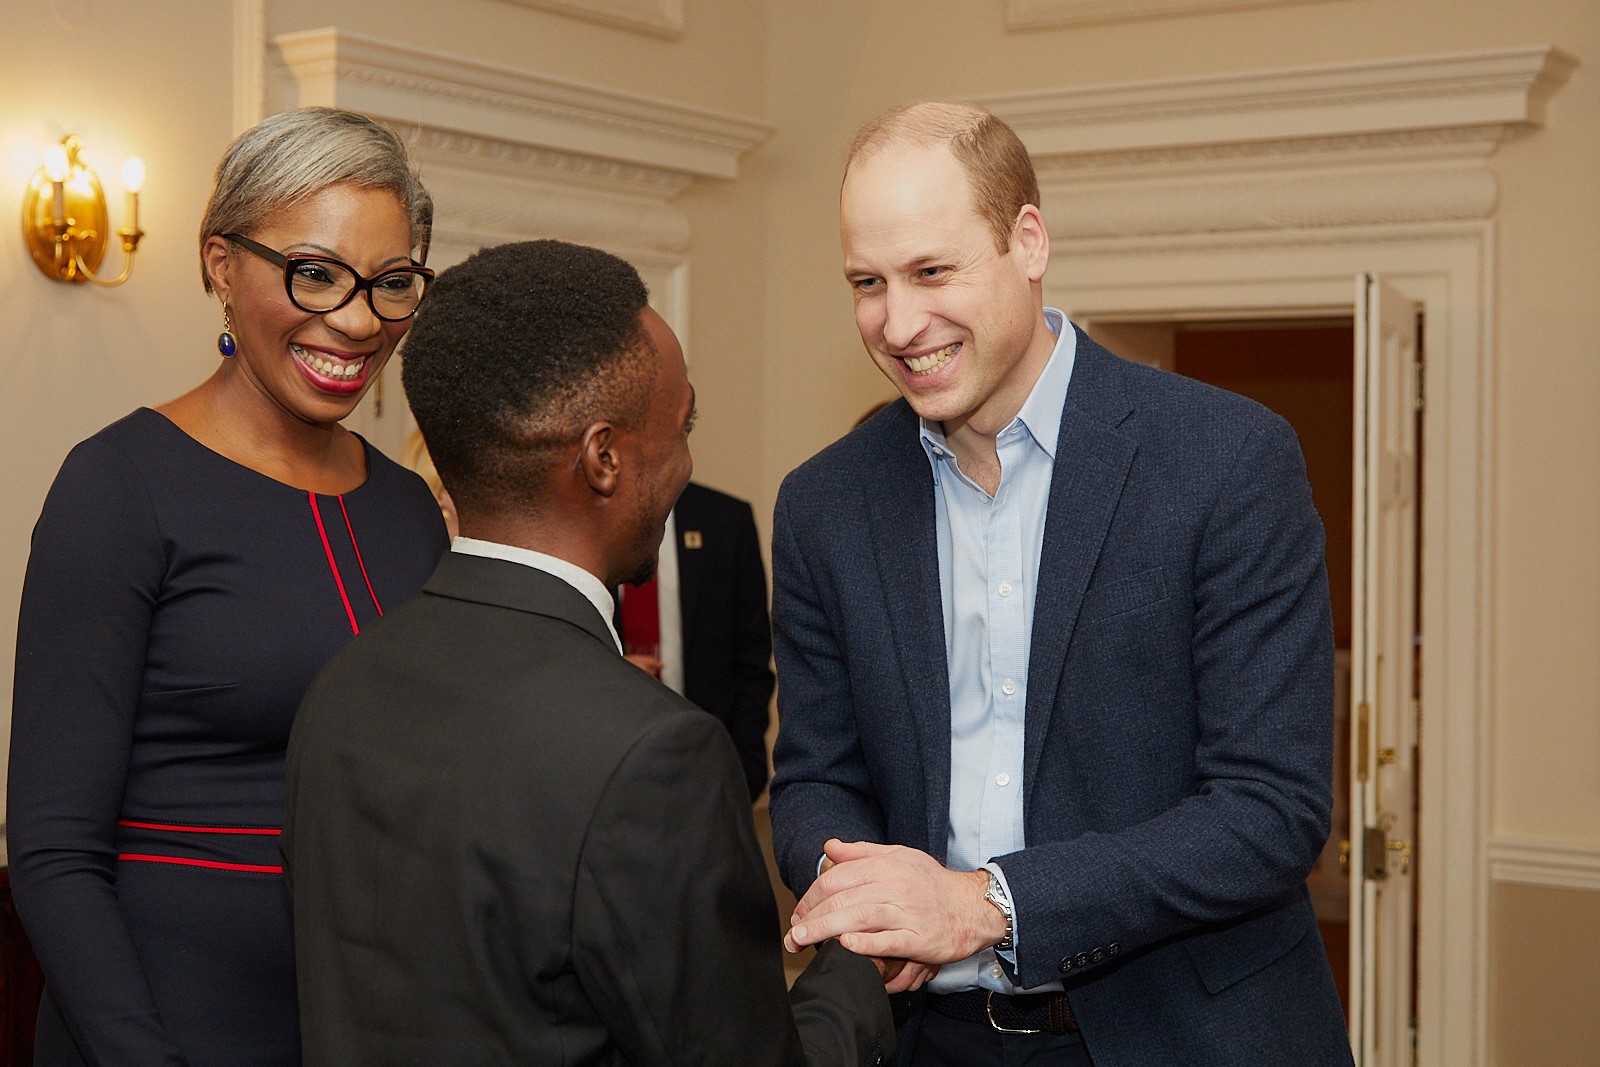 Erick gets congratulated by Prince William